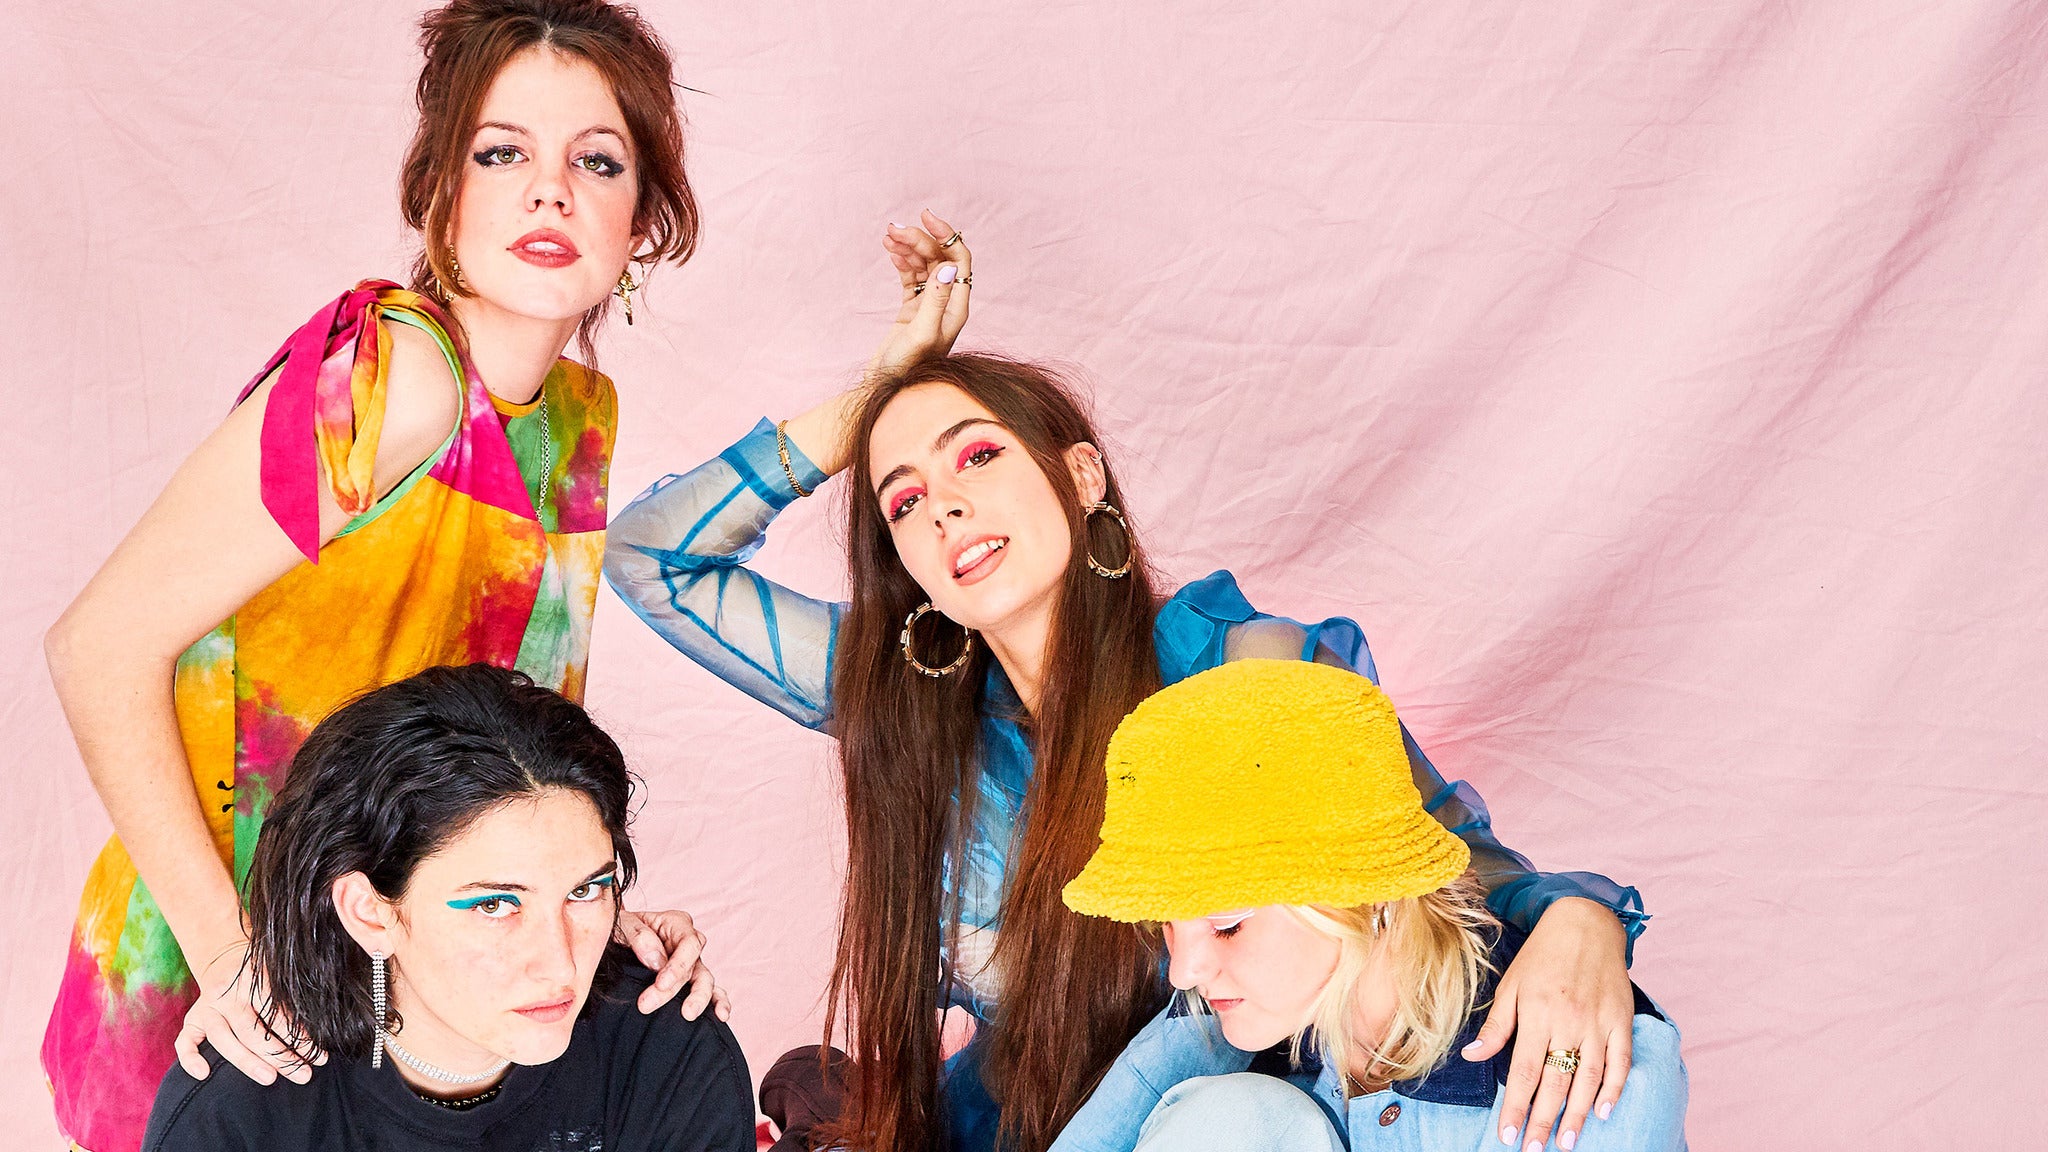 Hinds in New York promo photo for Artist presale offer code